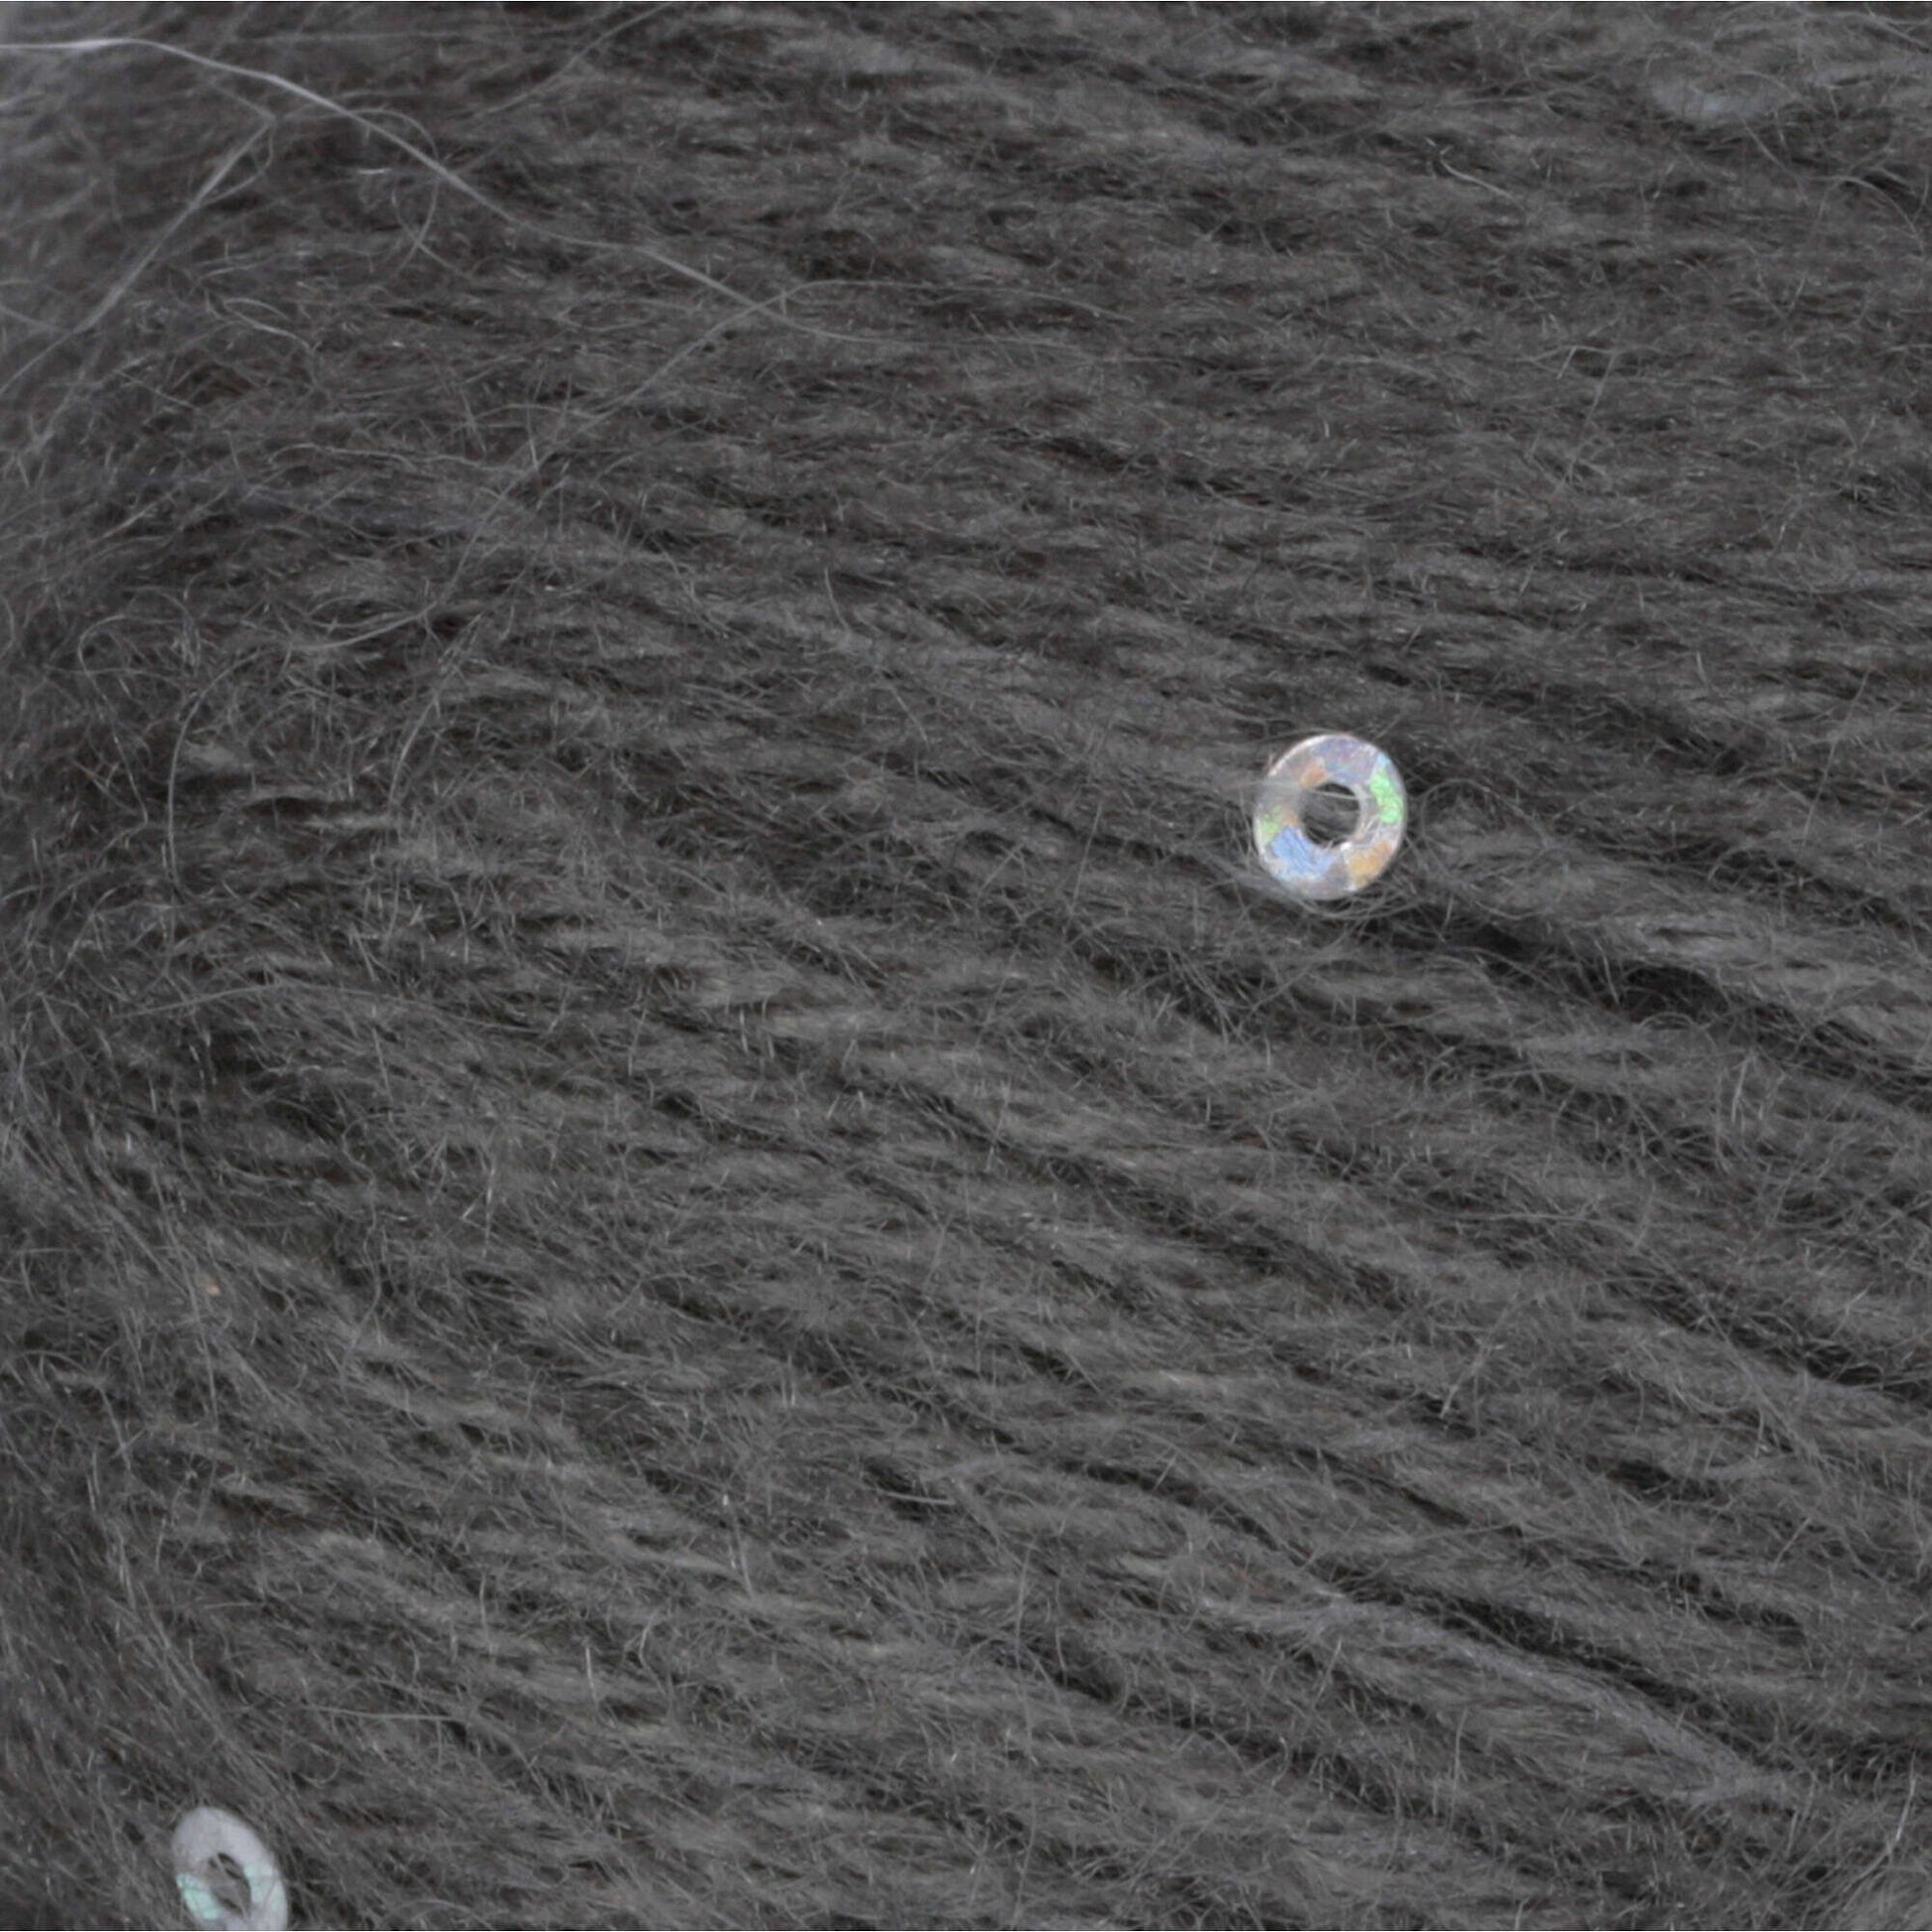 Patons Lace Sequin Yarn - Discontinued Smoky Quartz